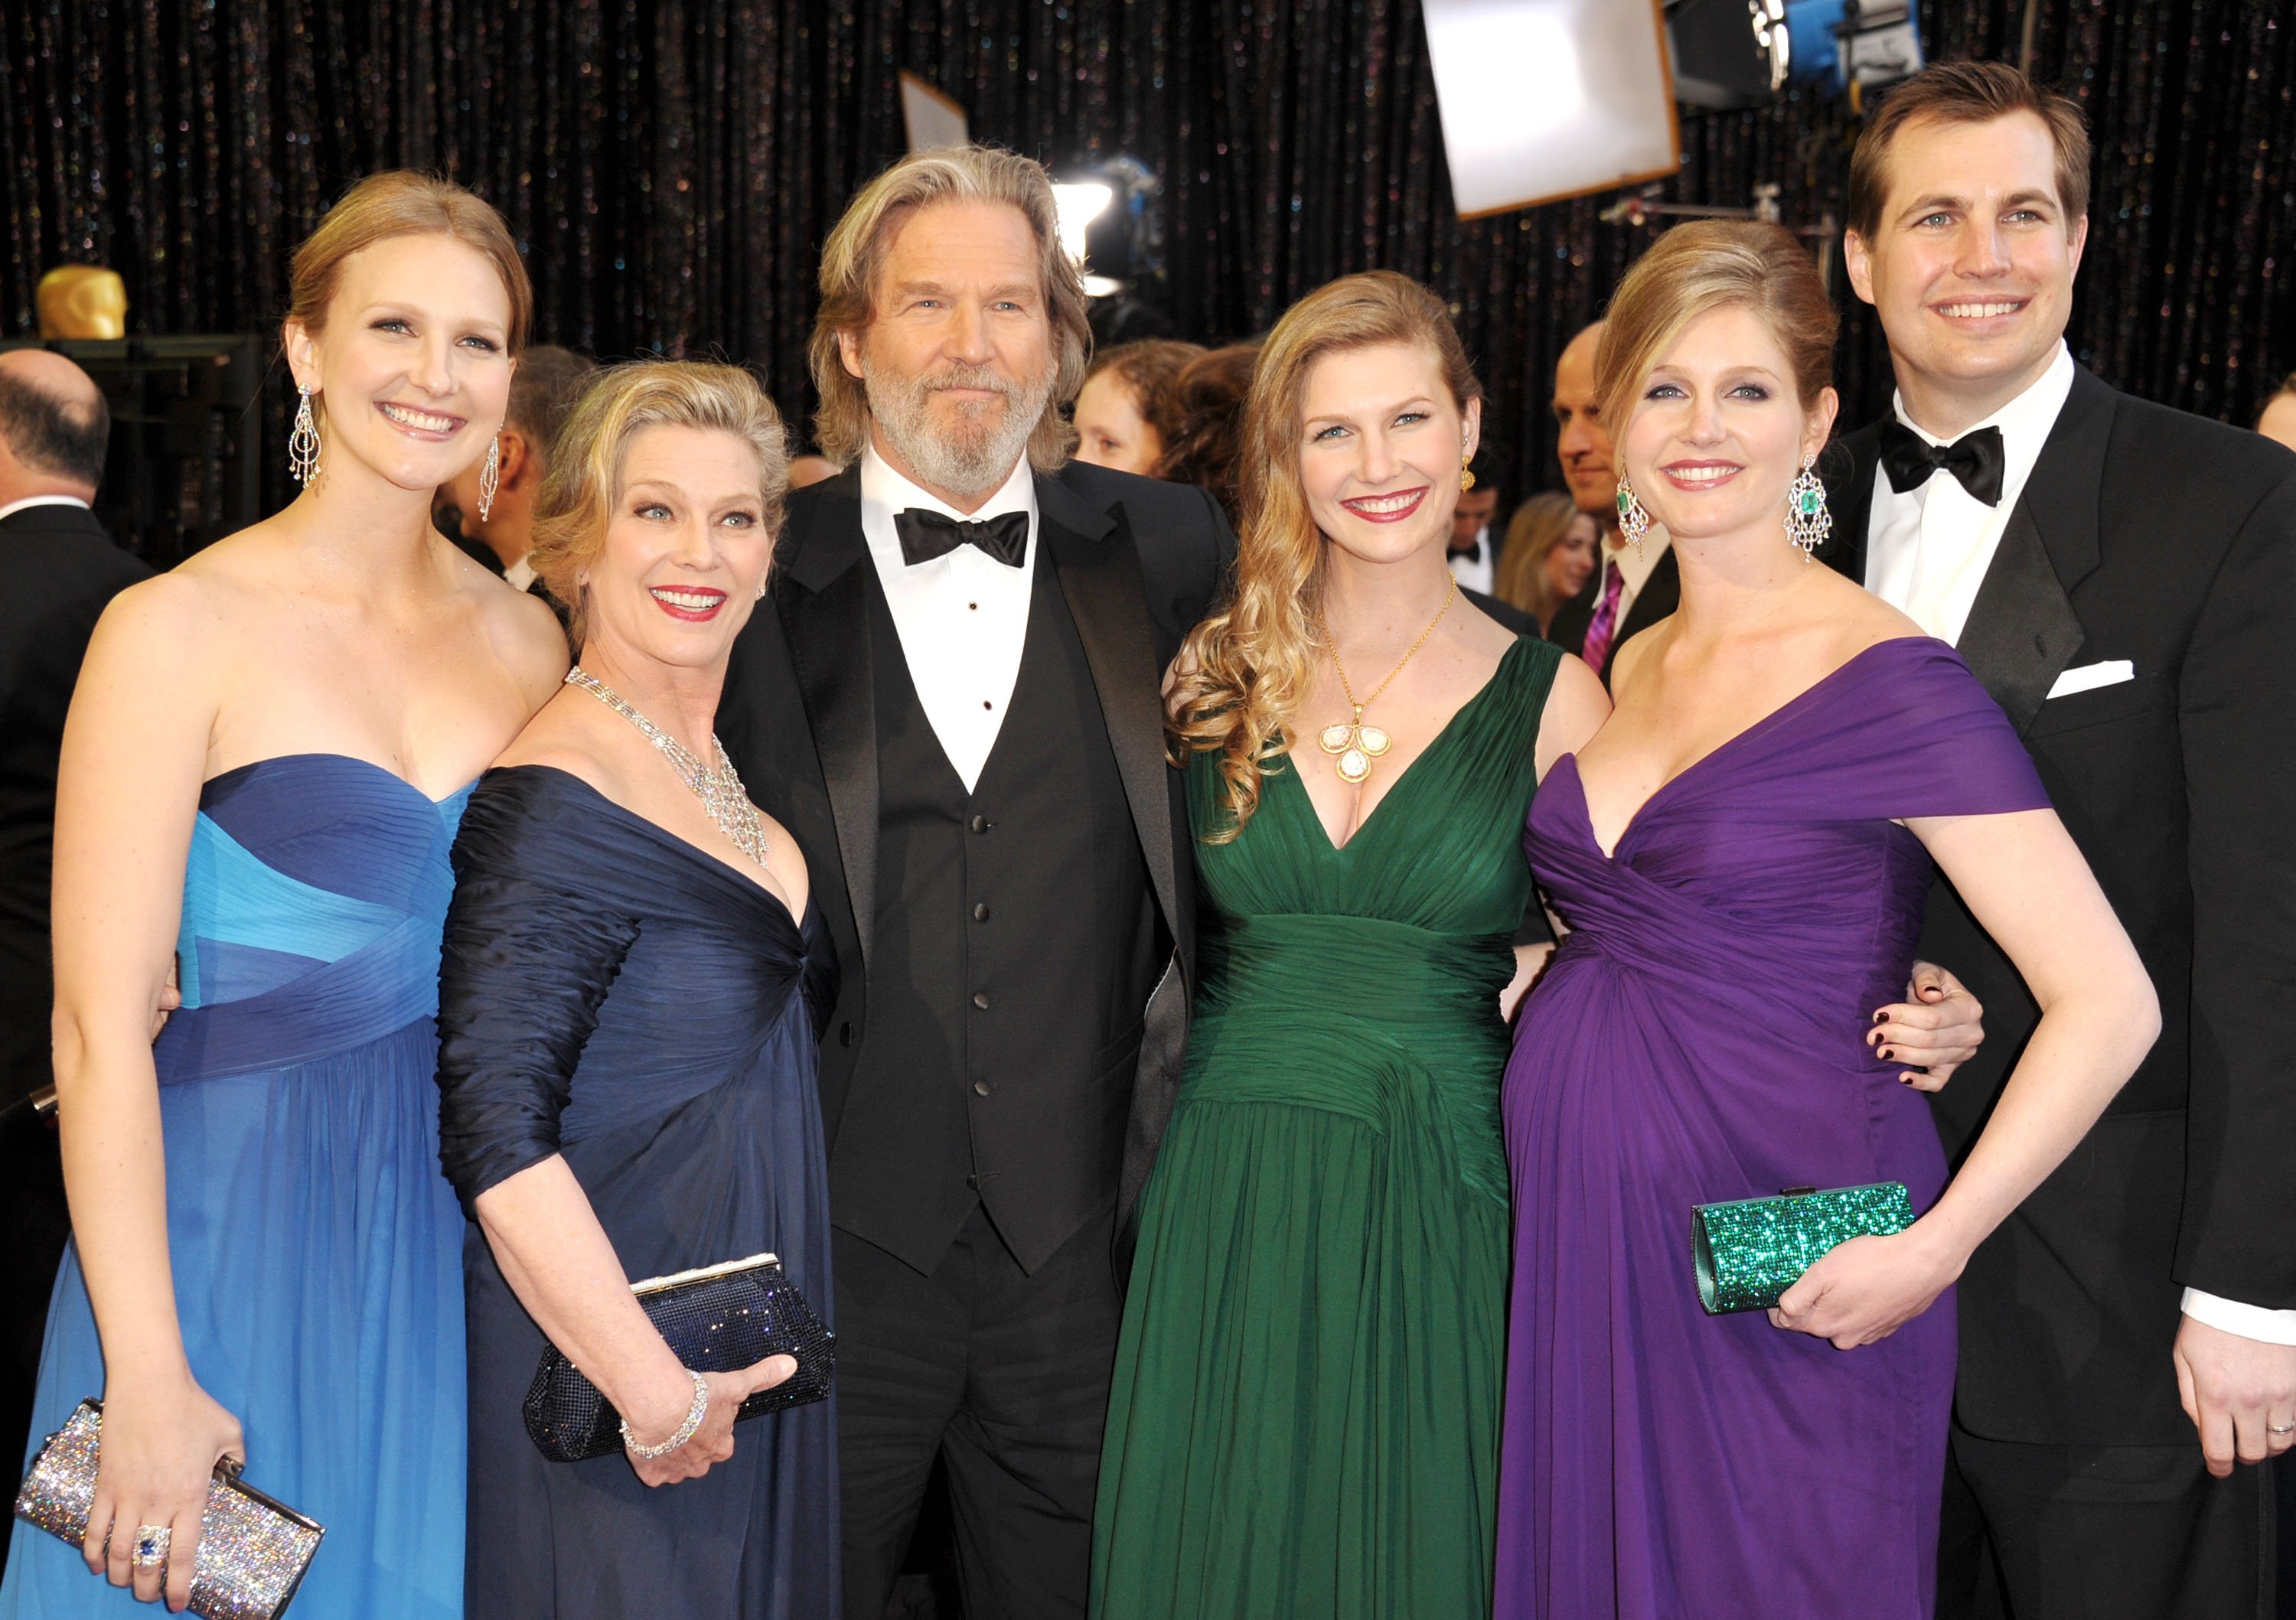 Jeff Bridges, Susan Bridges, and family arrive at the 83rd Annual Academy Awards on February 27, 2011. | Source: Getty Images